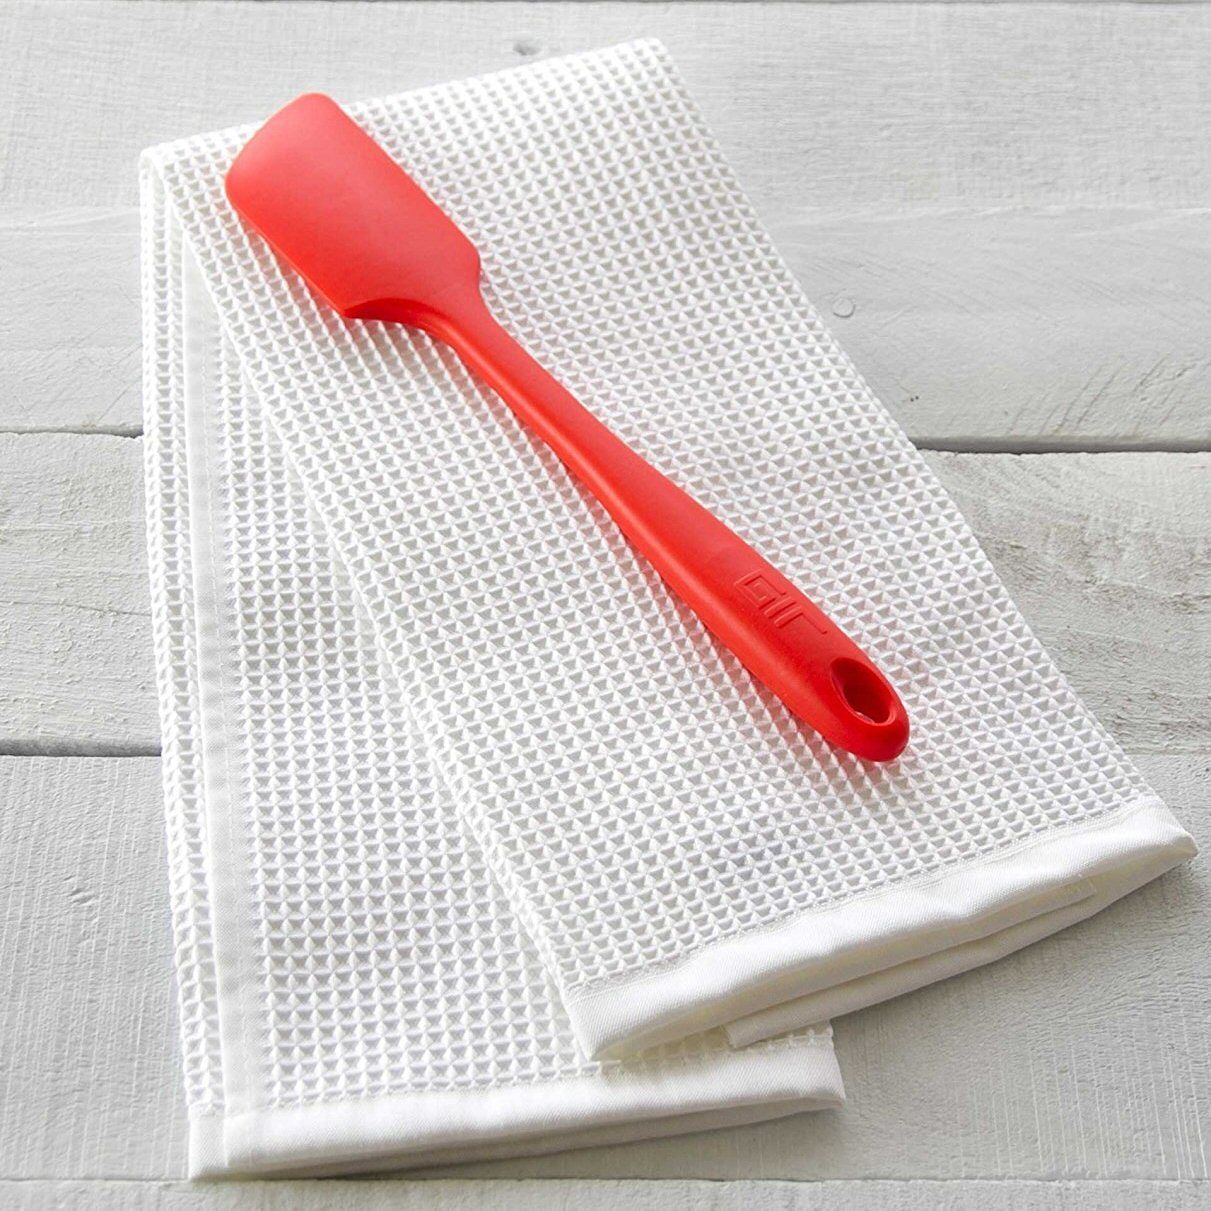  GIR - Premium Silicone Spatula - For Cooking, Baking & Mixing -  Skinny & Seamless Design - Heat-Resistant up to 550°F - Nonstick -  Dishwasher Safe Cookware - BPA Free 